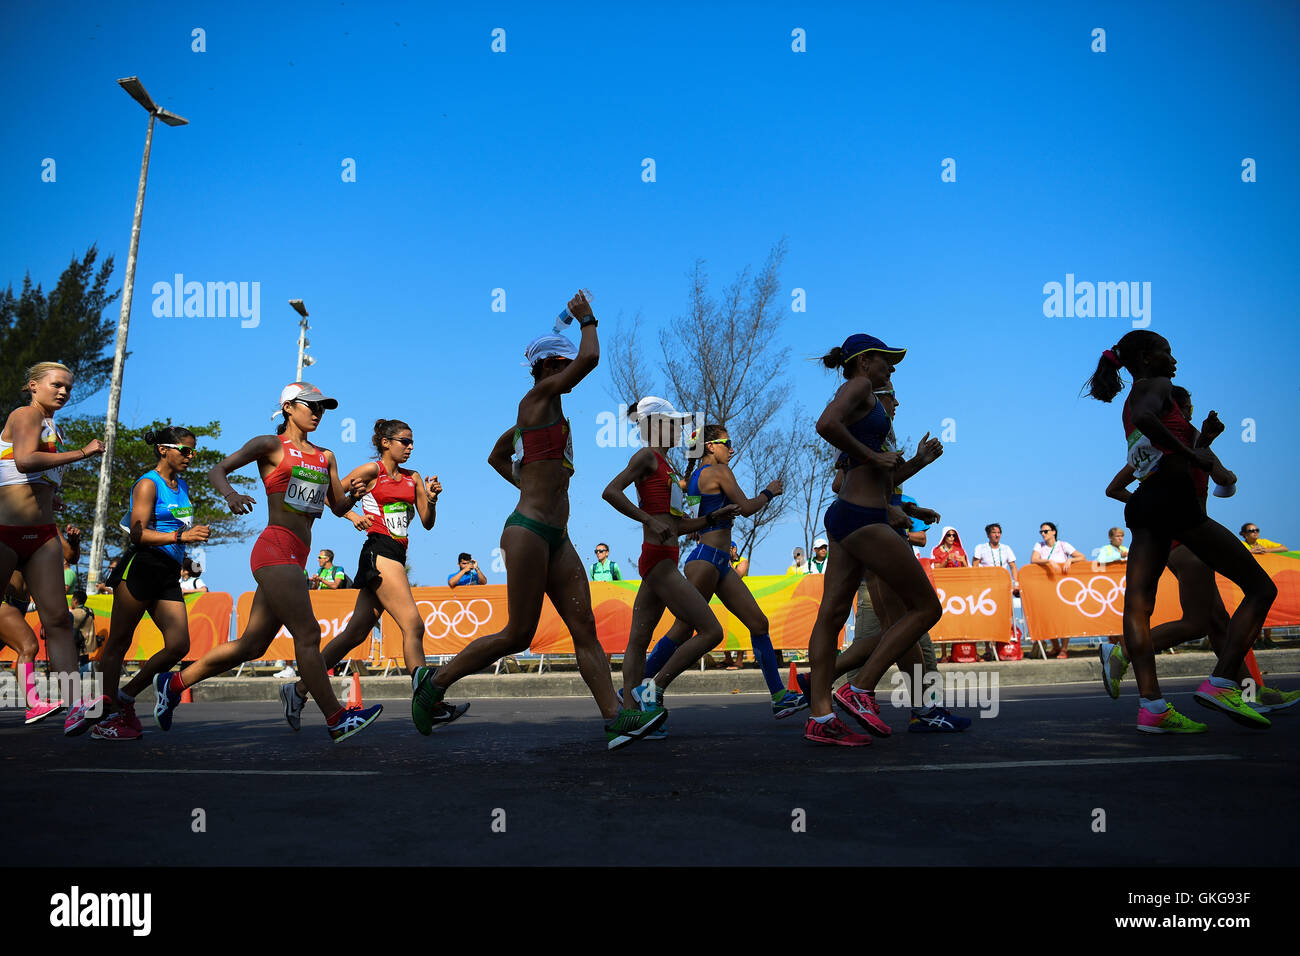 Rio de Janeiro, Brazil. 19th August, 2016. athletes on the first lap during the womens 20km race walk on Day 14 of the 2016 Rio Olympics at Pontal on August 19, 2016 in Rio de Janeiro, Brazil. (Photo by Roger Sedres/Gallo Images) Credit:  Roger Sedres/Alamy Live News Stock Photo